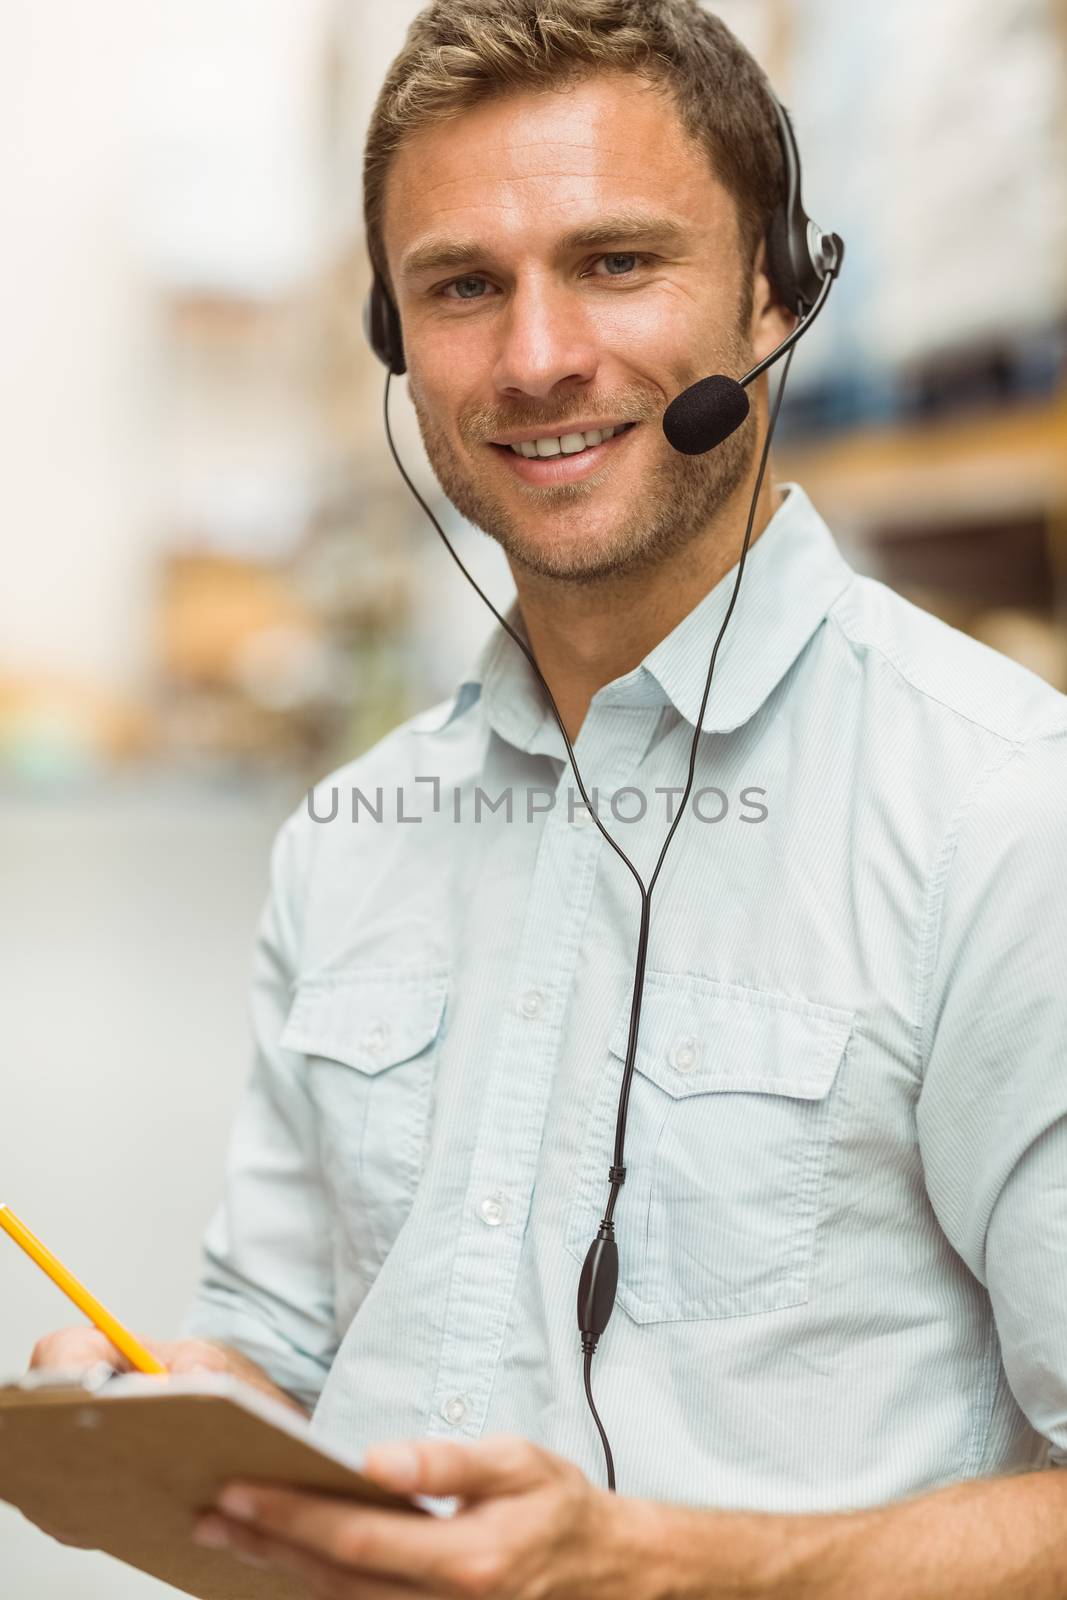 Warehouse manager wearing headset writing on clipboard  by Wavebreakmedia